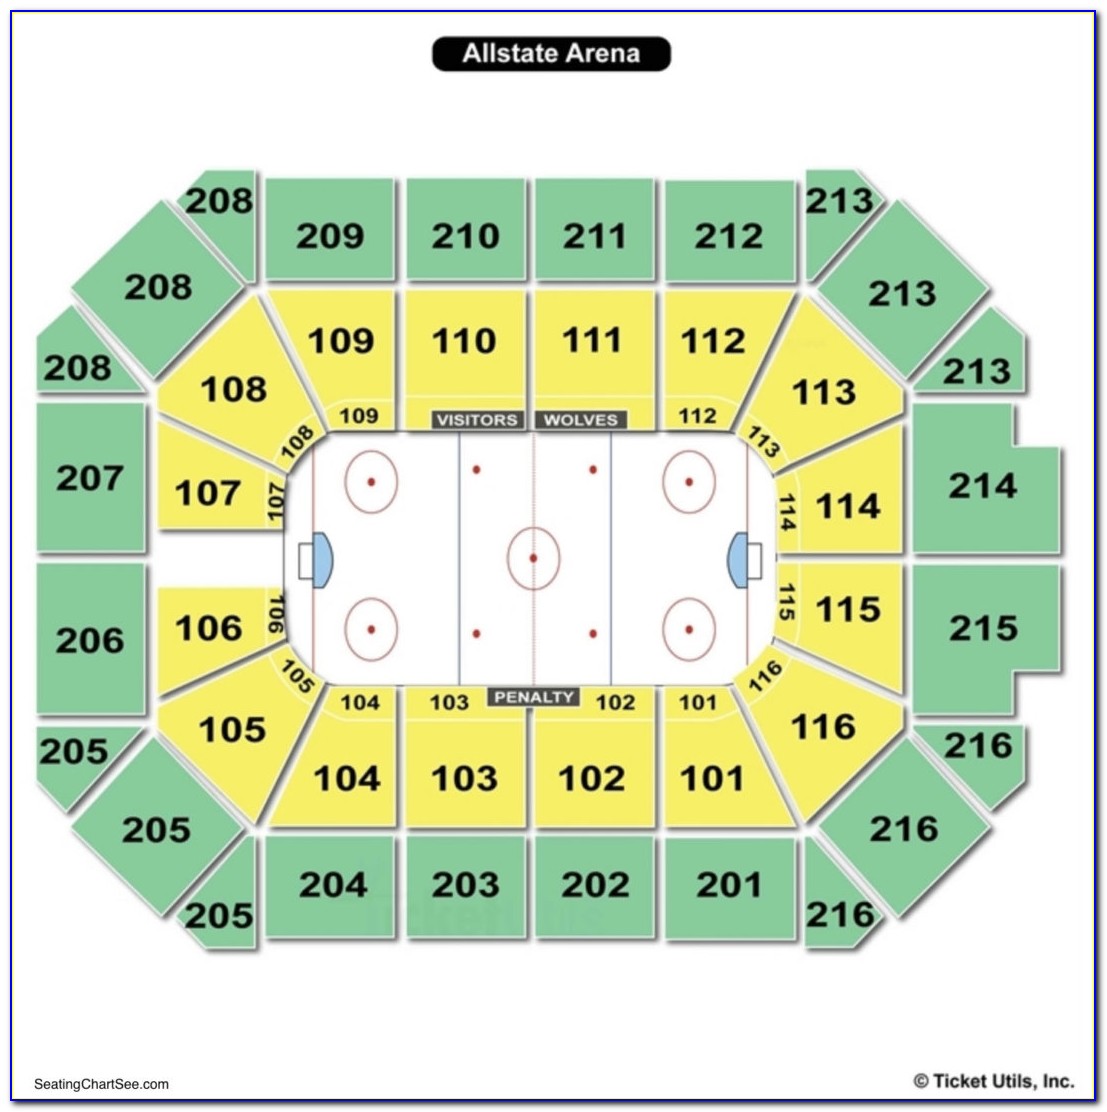 Allstate Arena Seating Map Rows